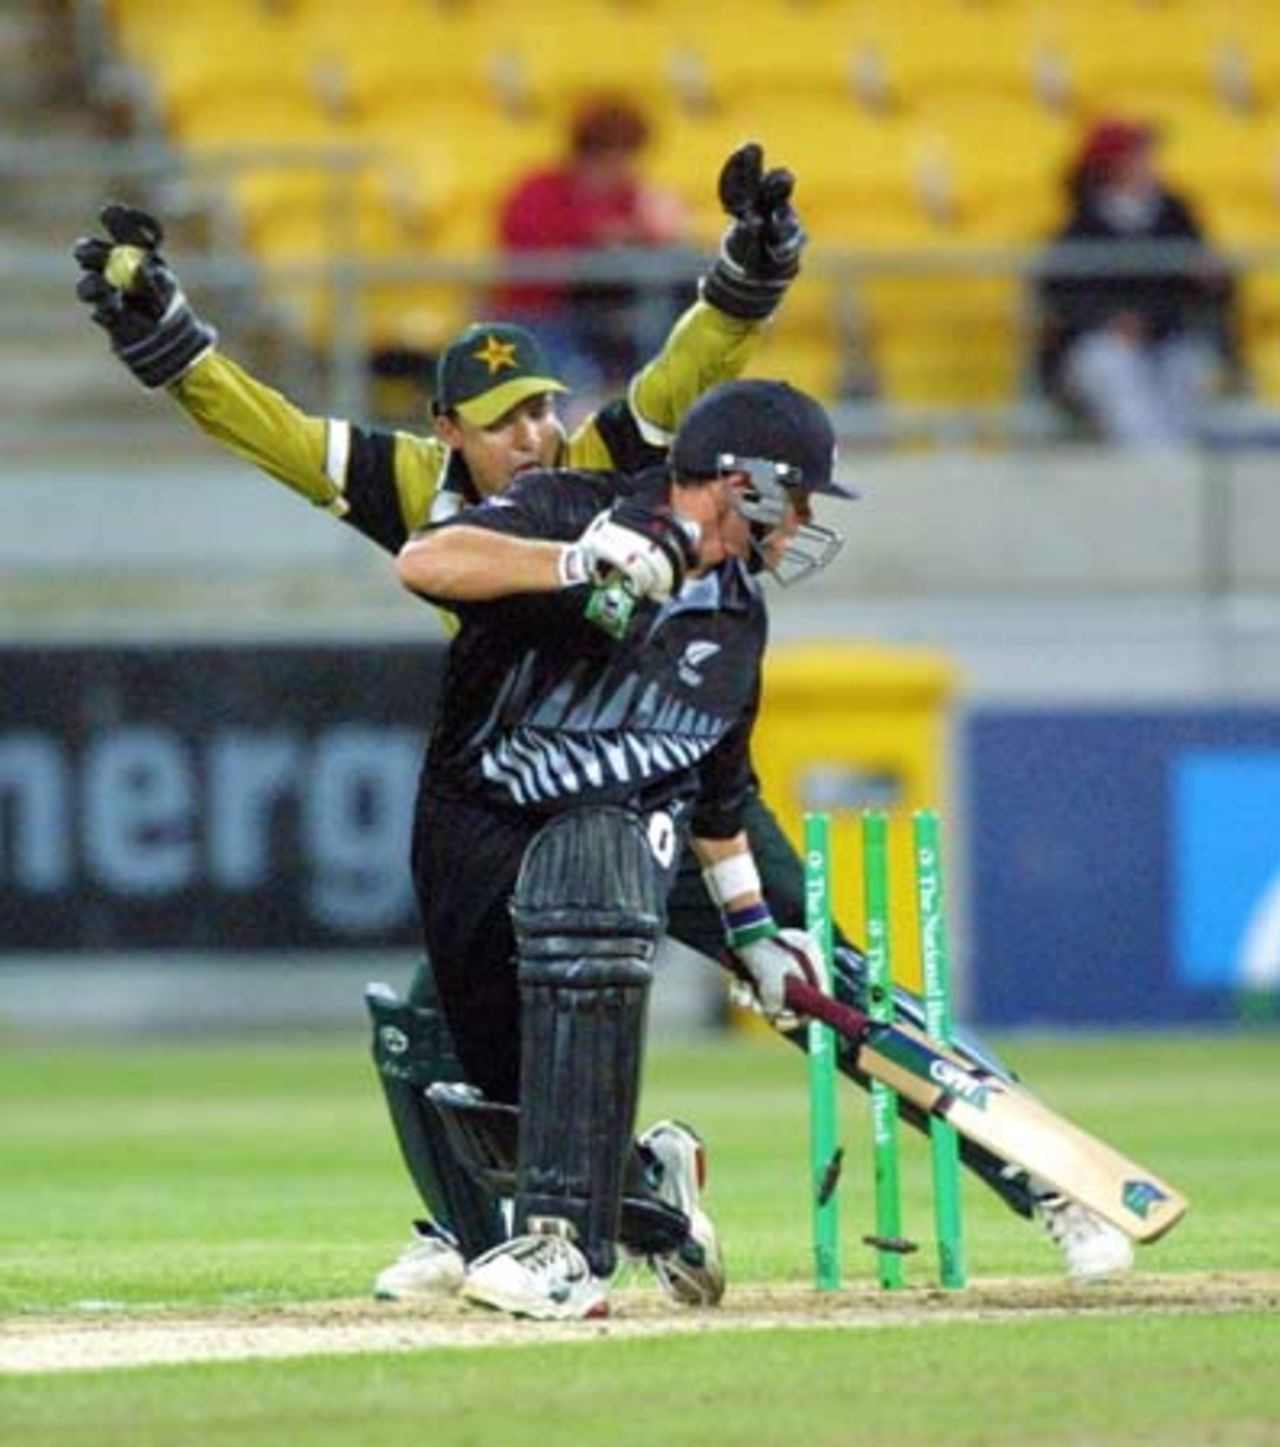 New Zealand batsman Lou Vincent tries to regain his ground as he misses a delivery down the leg side from Pakistan off spinner Saqlain Mushtaq. Wicket-keeper Moin Khan appeals for the stumping, which is referred to third umpire Steve Dunne, who adjudges Vincent out for 34. 3rd One-Day International: New Zealand v Pakistan at WestpacTrust Stadium, Wellington, 22 February 2001.